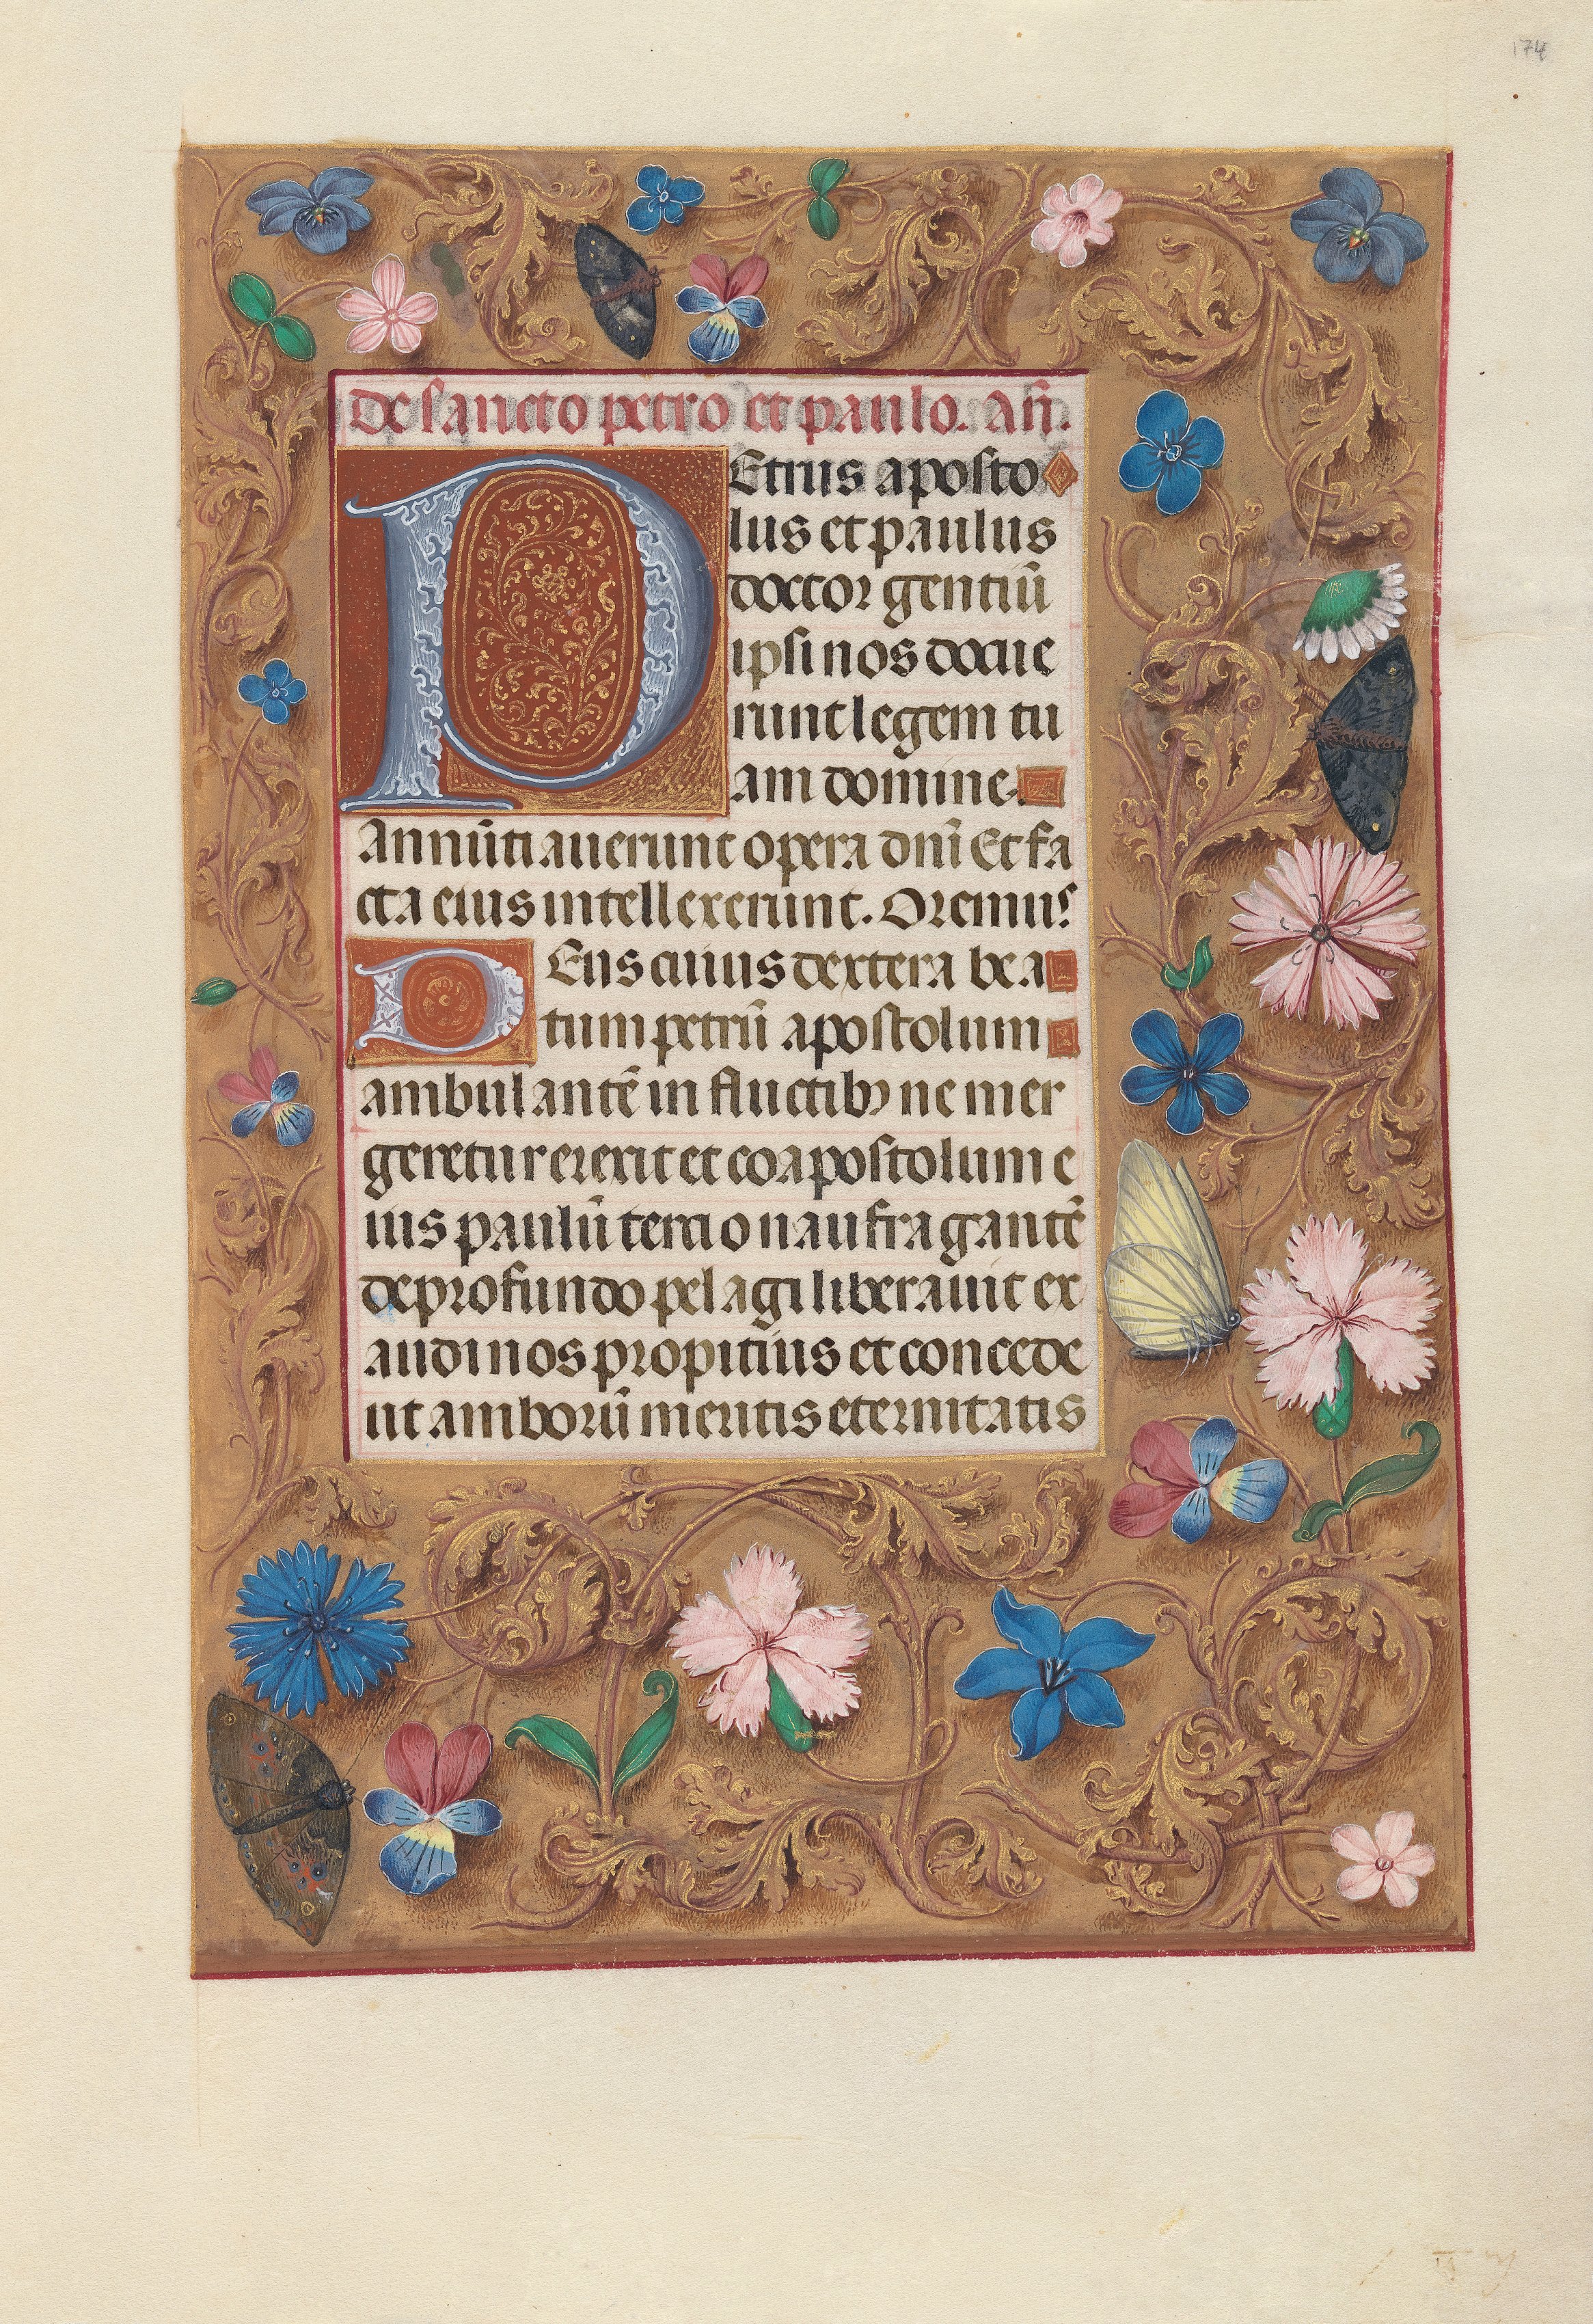 Hours of Queen Isabella the Catholic, Queen of Spain:  Fol. 174r